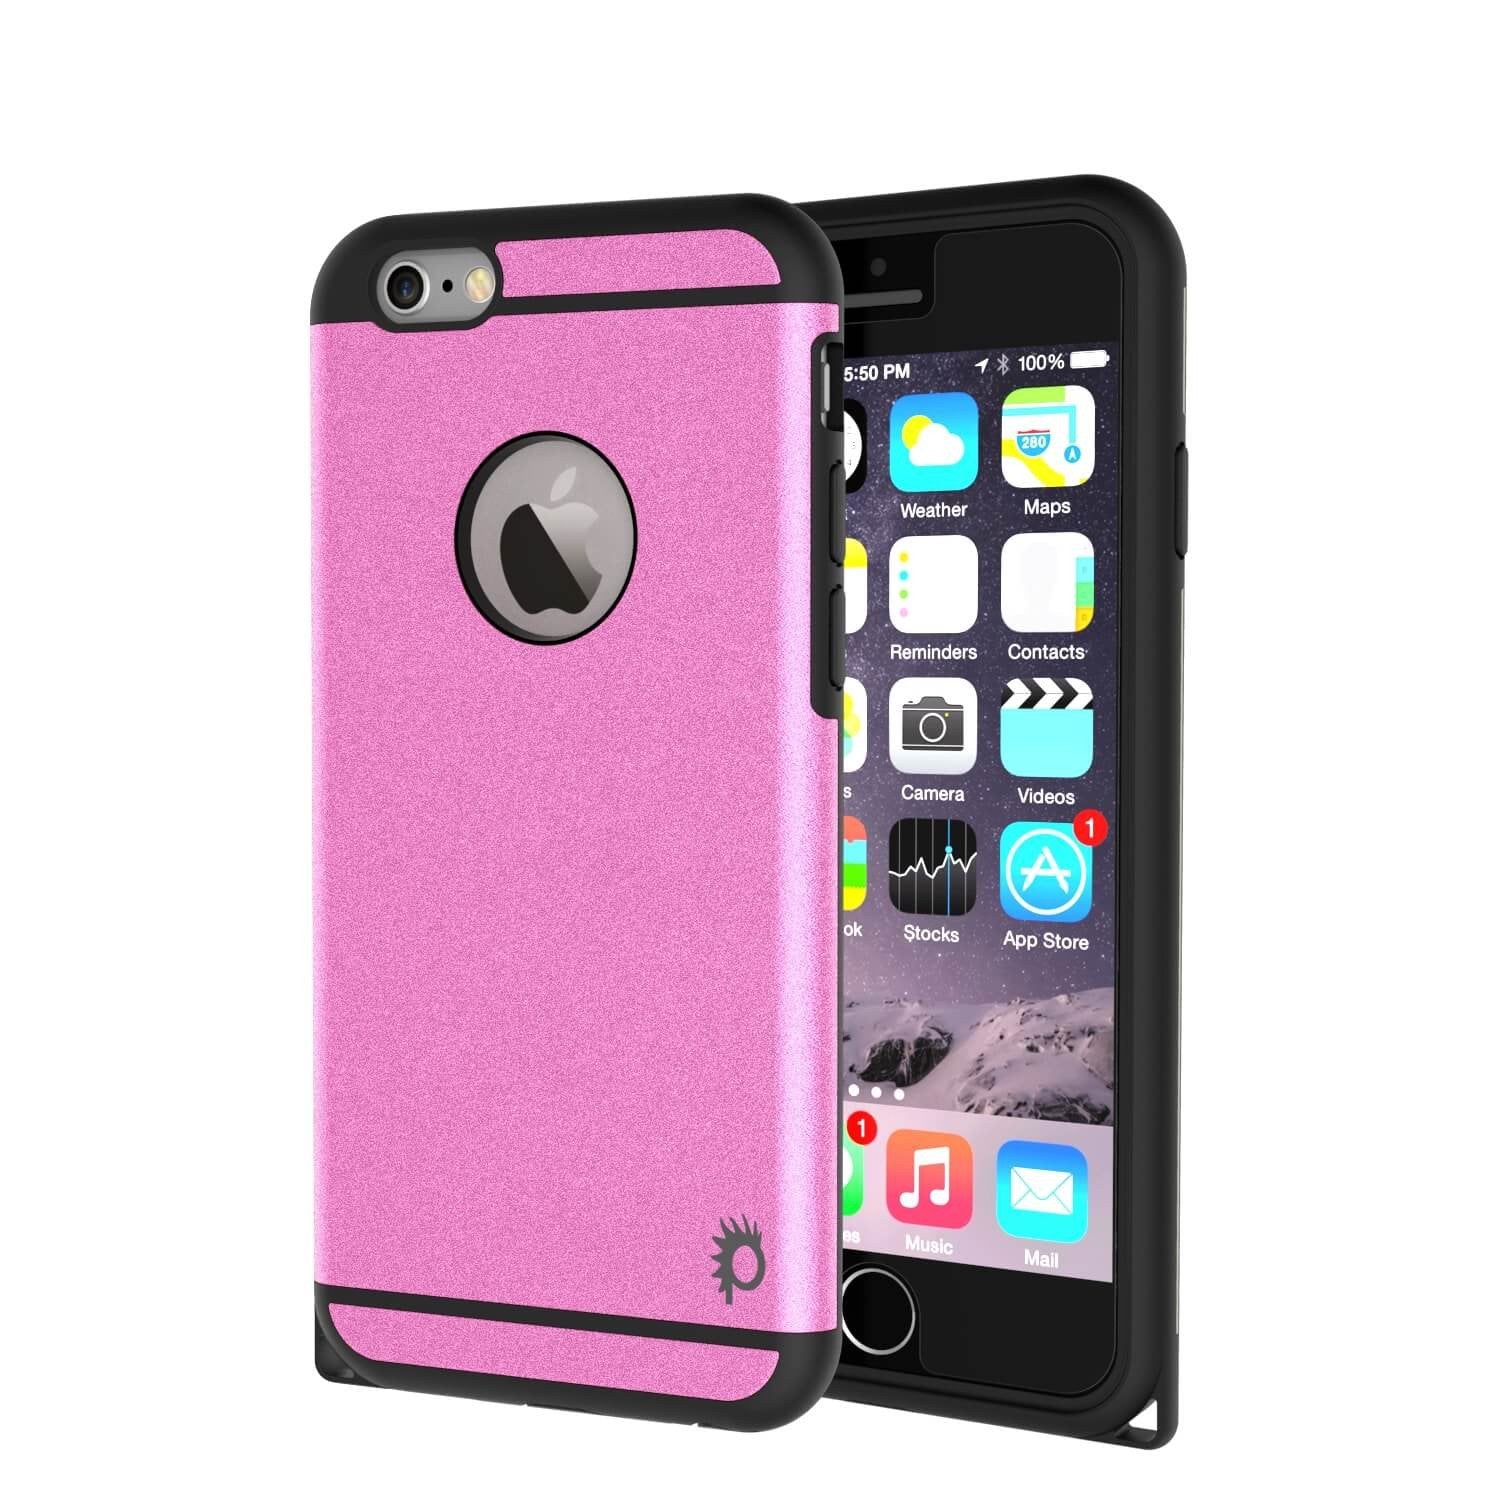 iPhone 6s Plus/6 Plus Case PunkCase Galactic Pink Slim w/ Tempered Glass Protector Lifetime Warranty